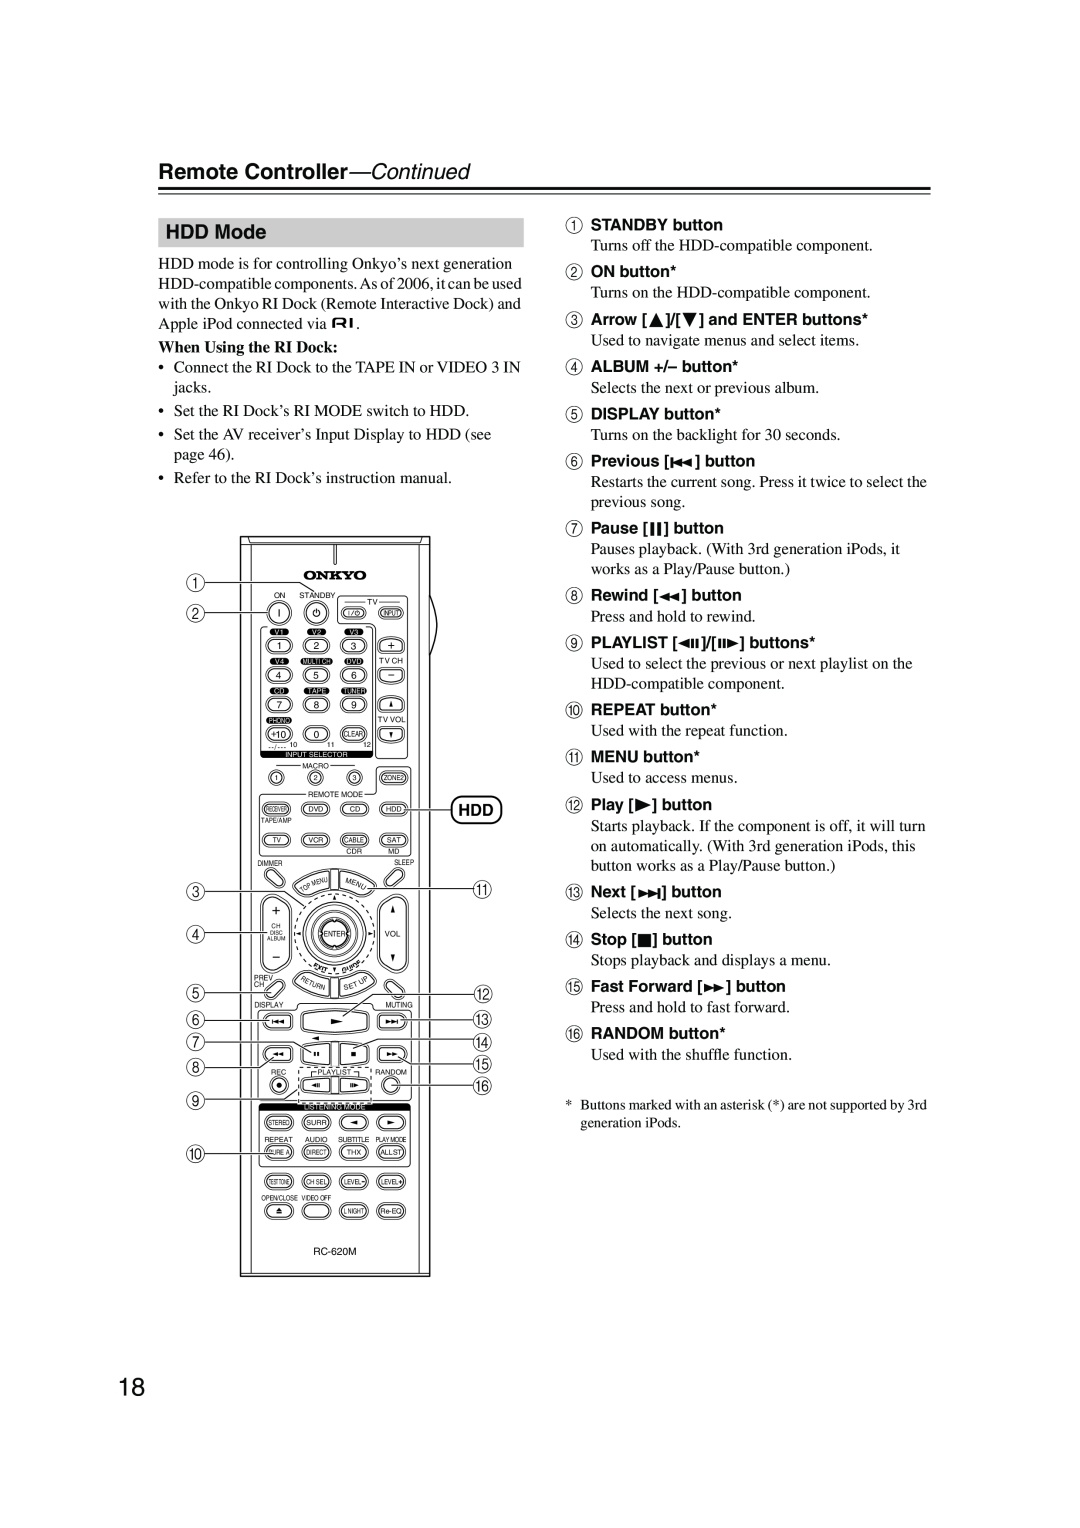 Onkyo SR804 instruction manual HDD Mode, Remote Controller—Continued 